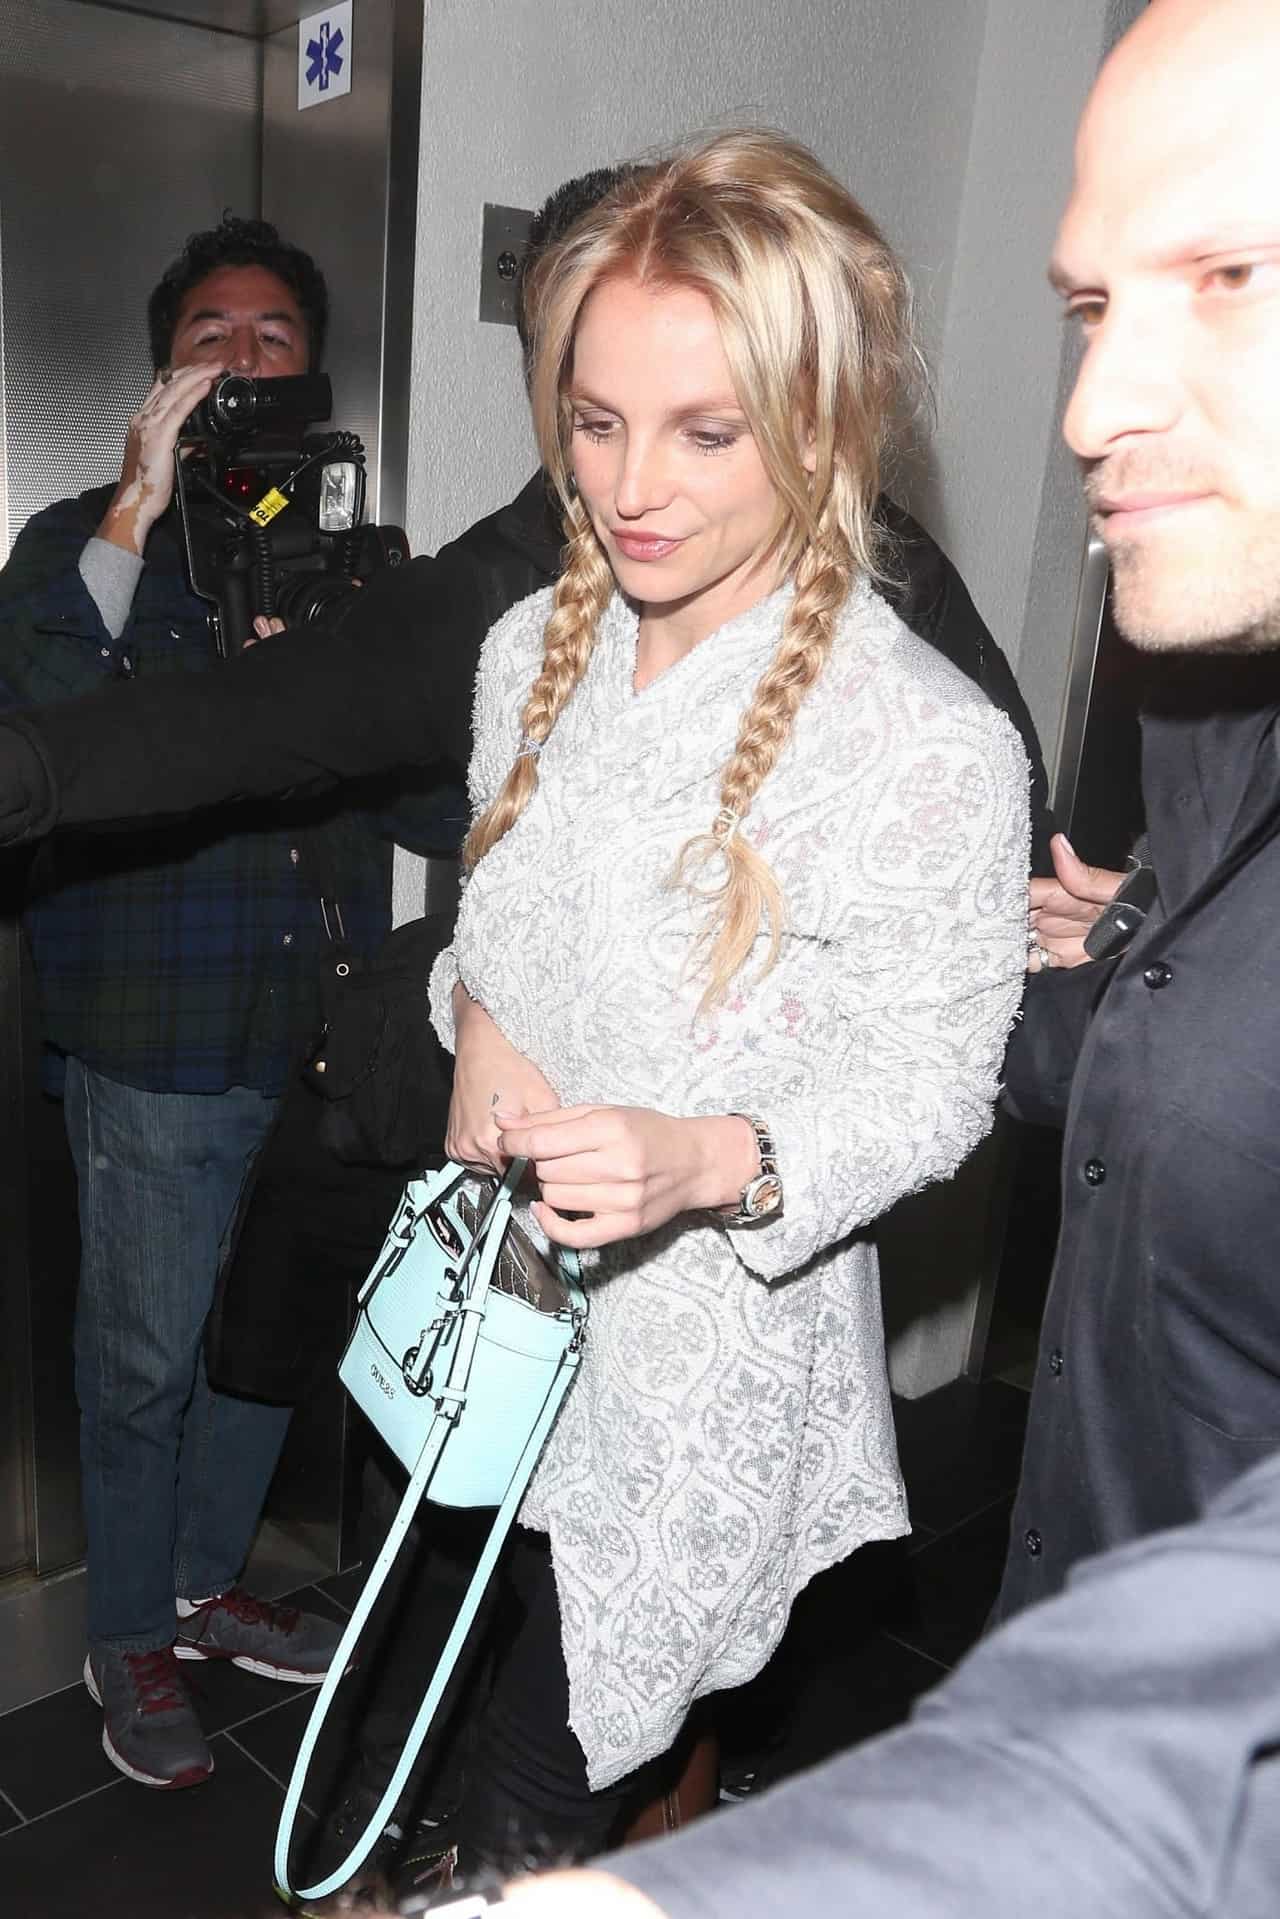 Britney Spears Looks Effortlessly Chic in White Lace Top and Jeans at LAX